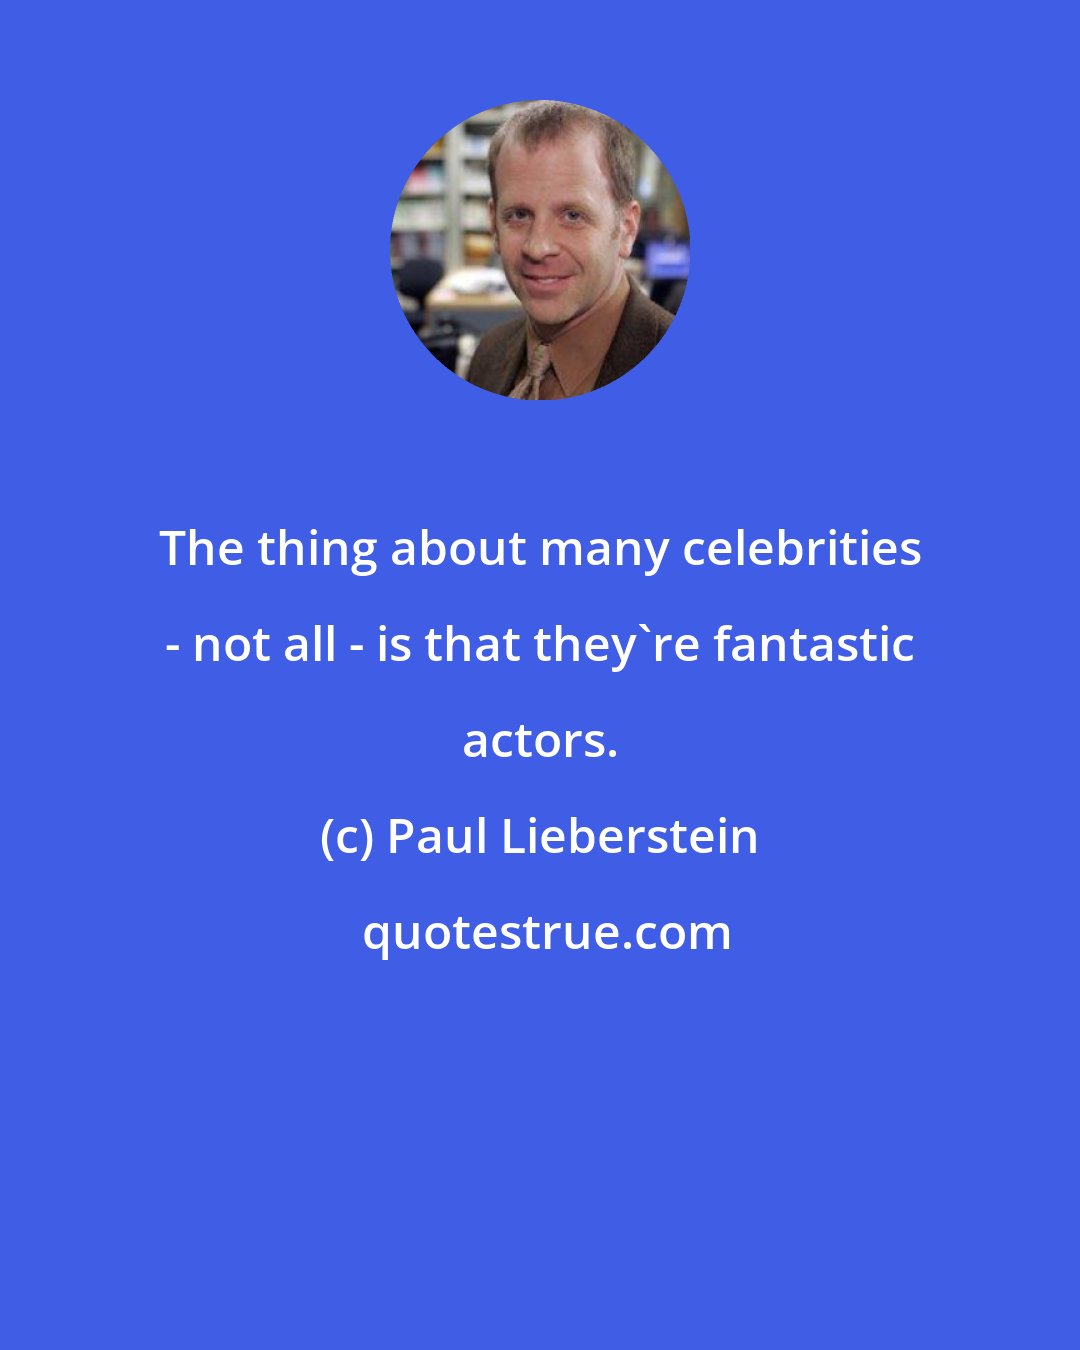 Paul Lieberstein: The thing about many celebrities - not all - is that they're fantastic actors.